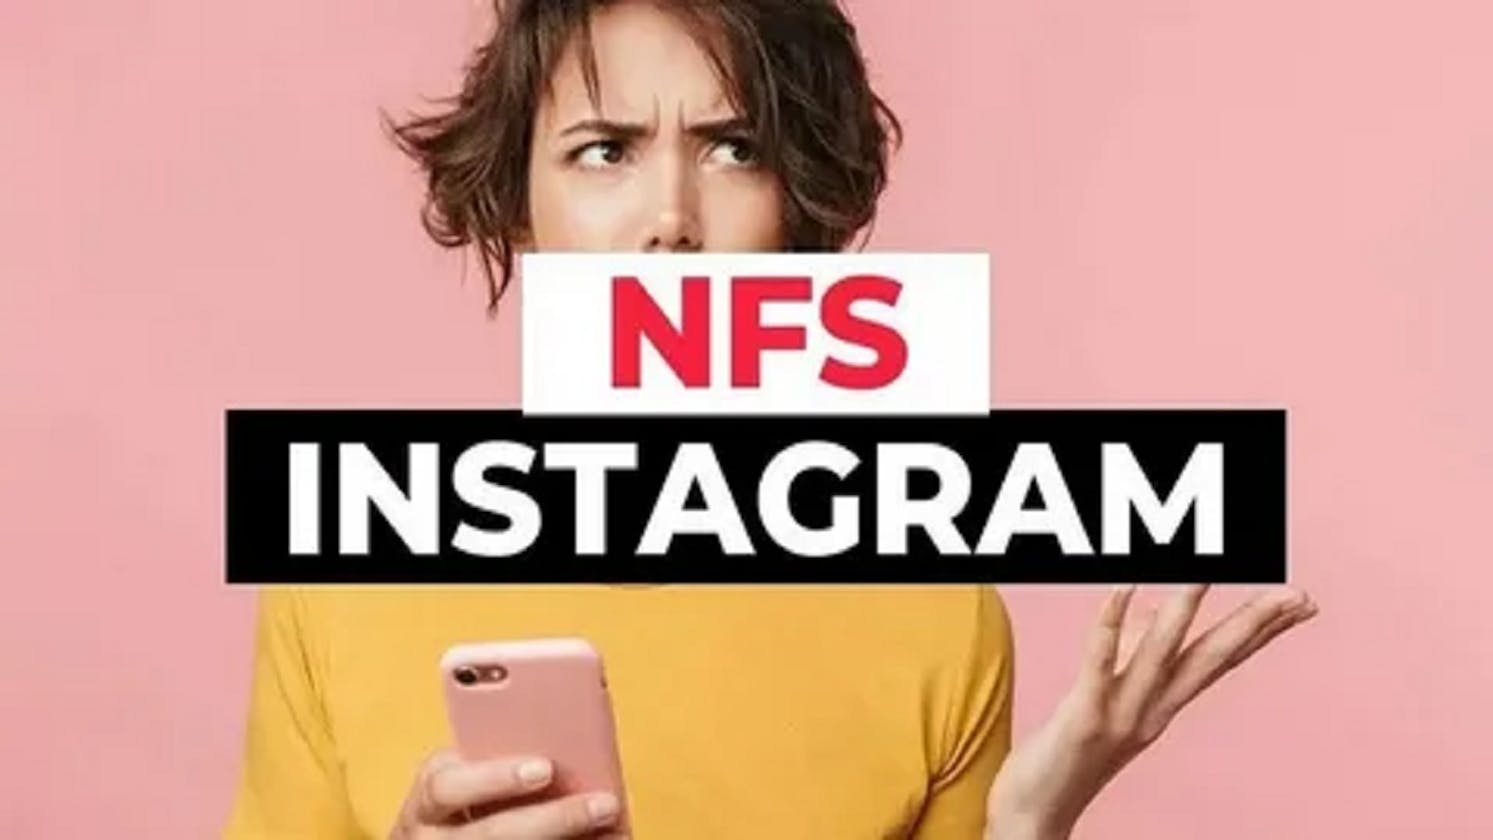 What Does "NFS" Mean on Instagram? 30 Eye-Opening Revelations!